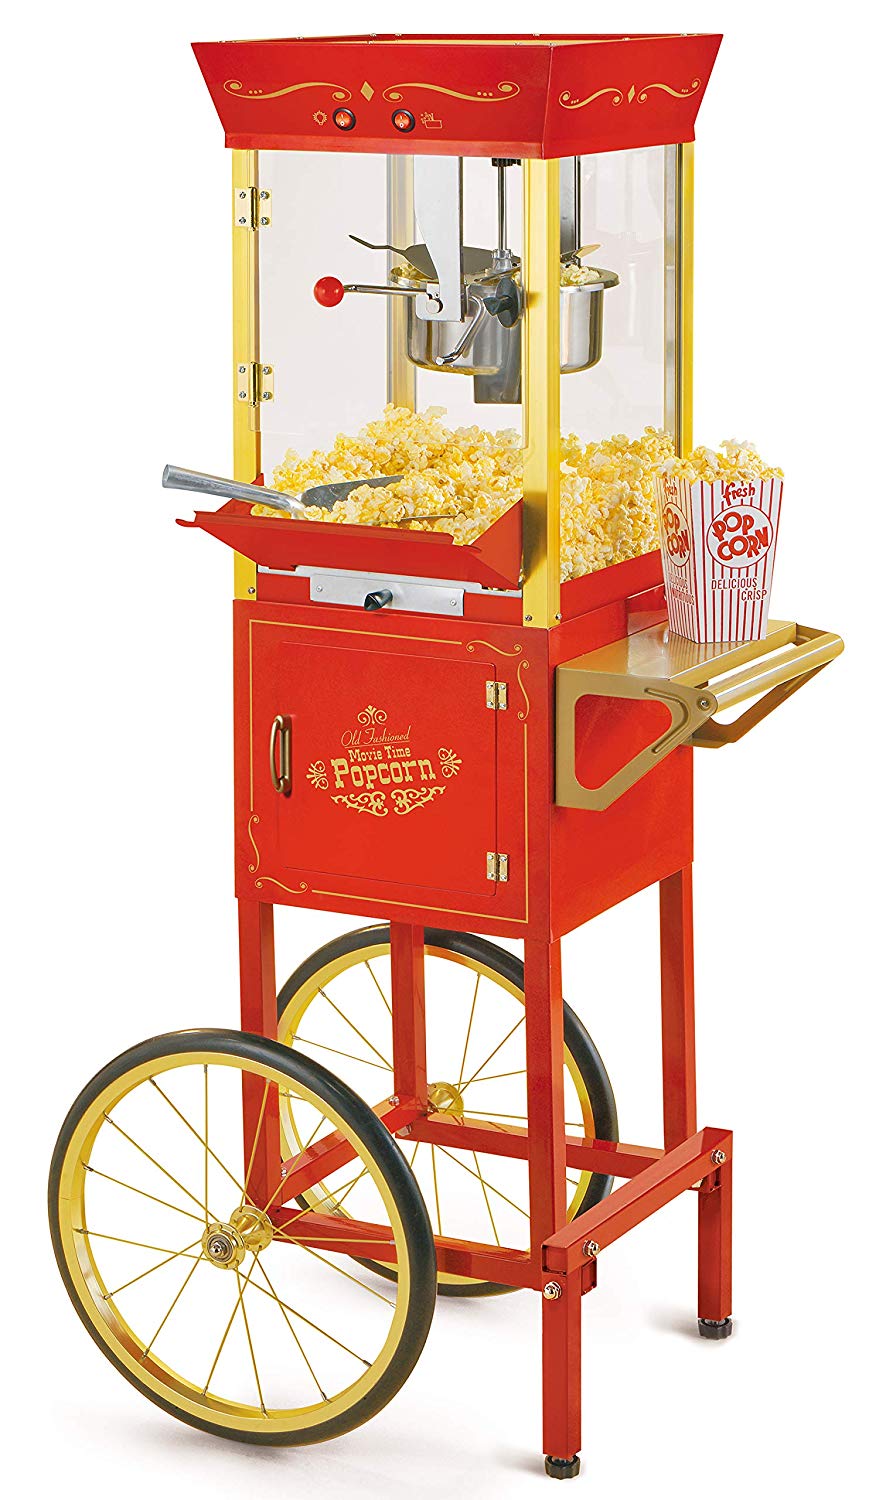 Nostalgia CCP510 Vintage Professional Popcorn Cart-New 8-Ounce Kettle-53 Inches Tall-Red